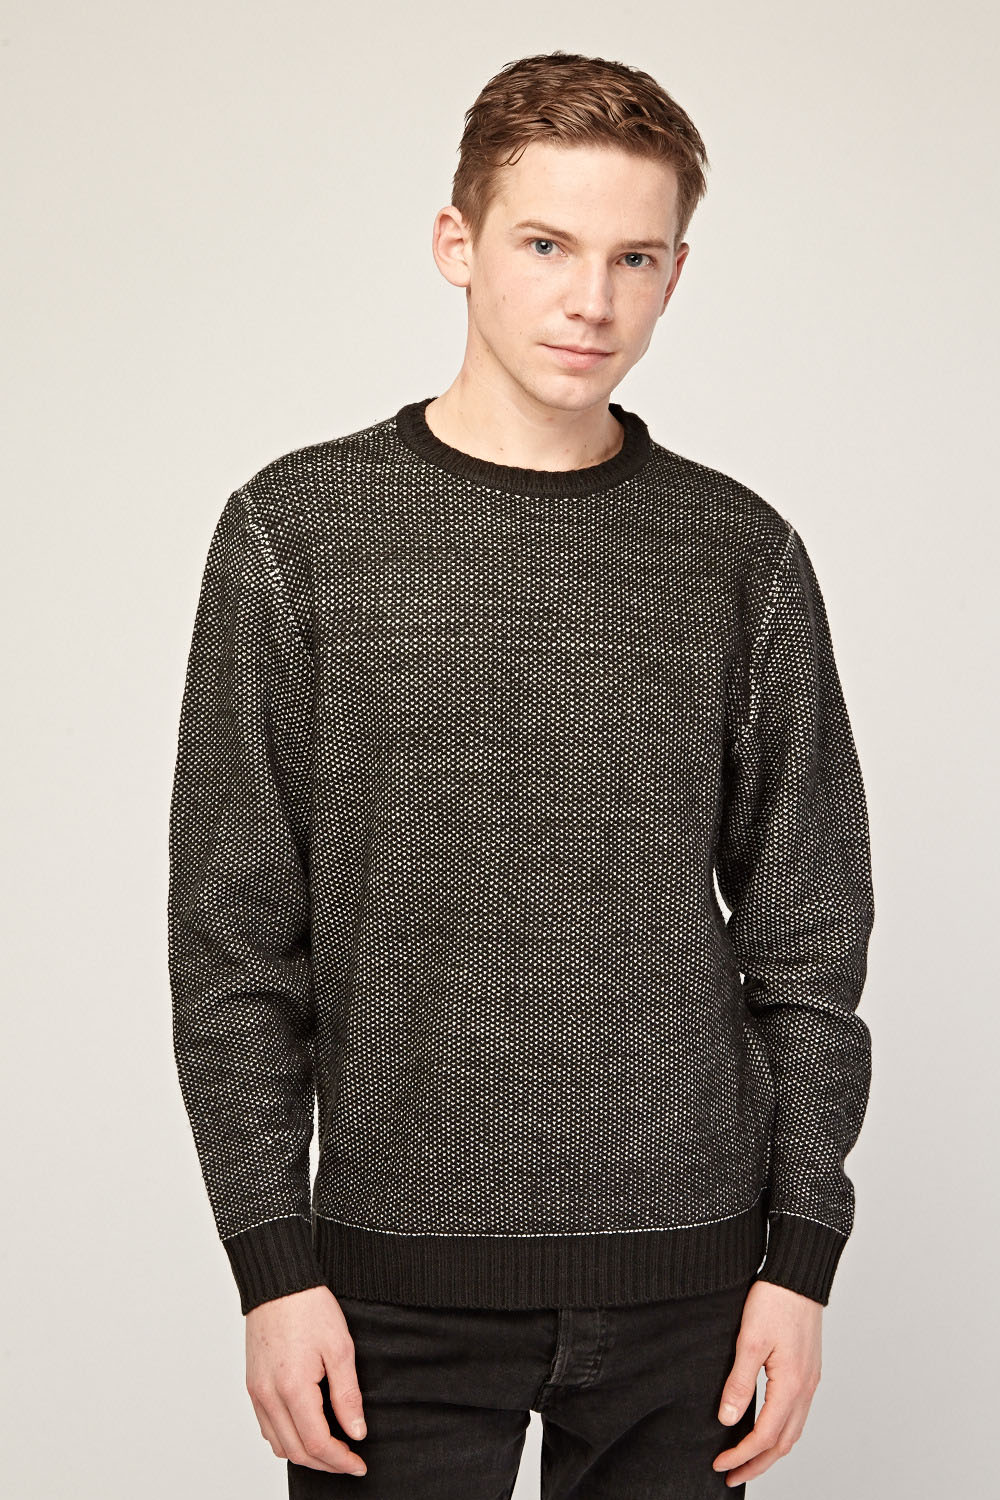 Textured Crew Neck Knitted Jumper - Just $3